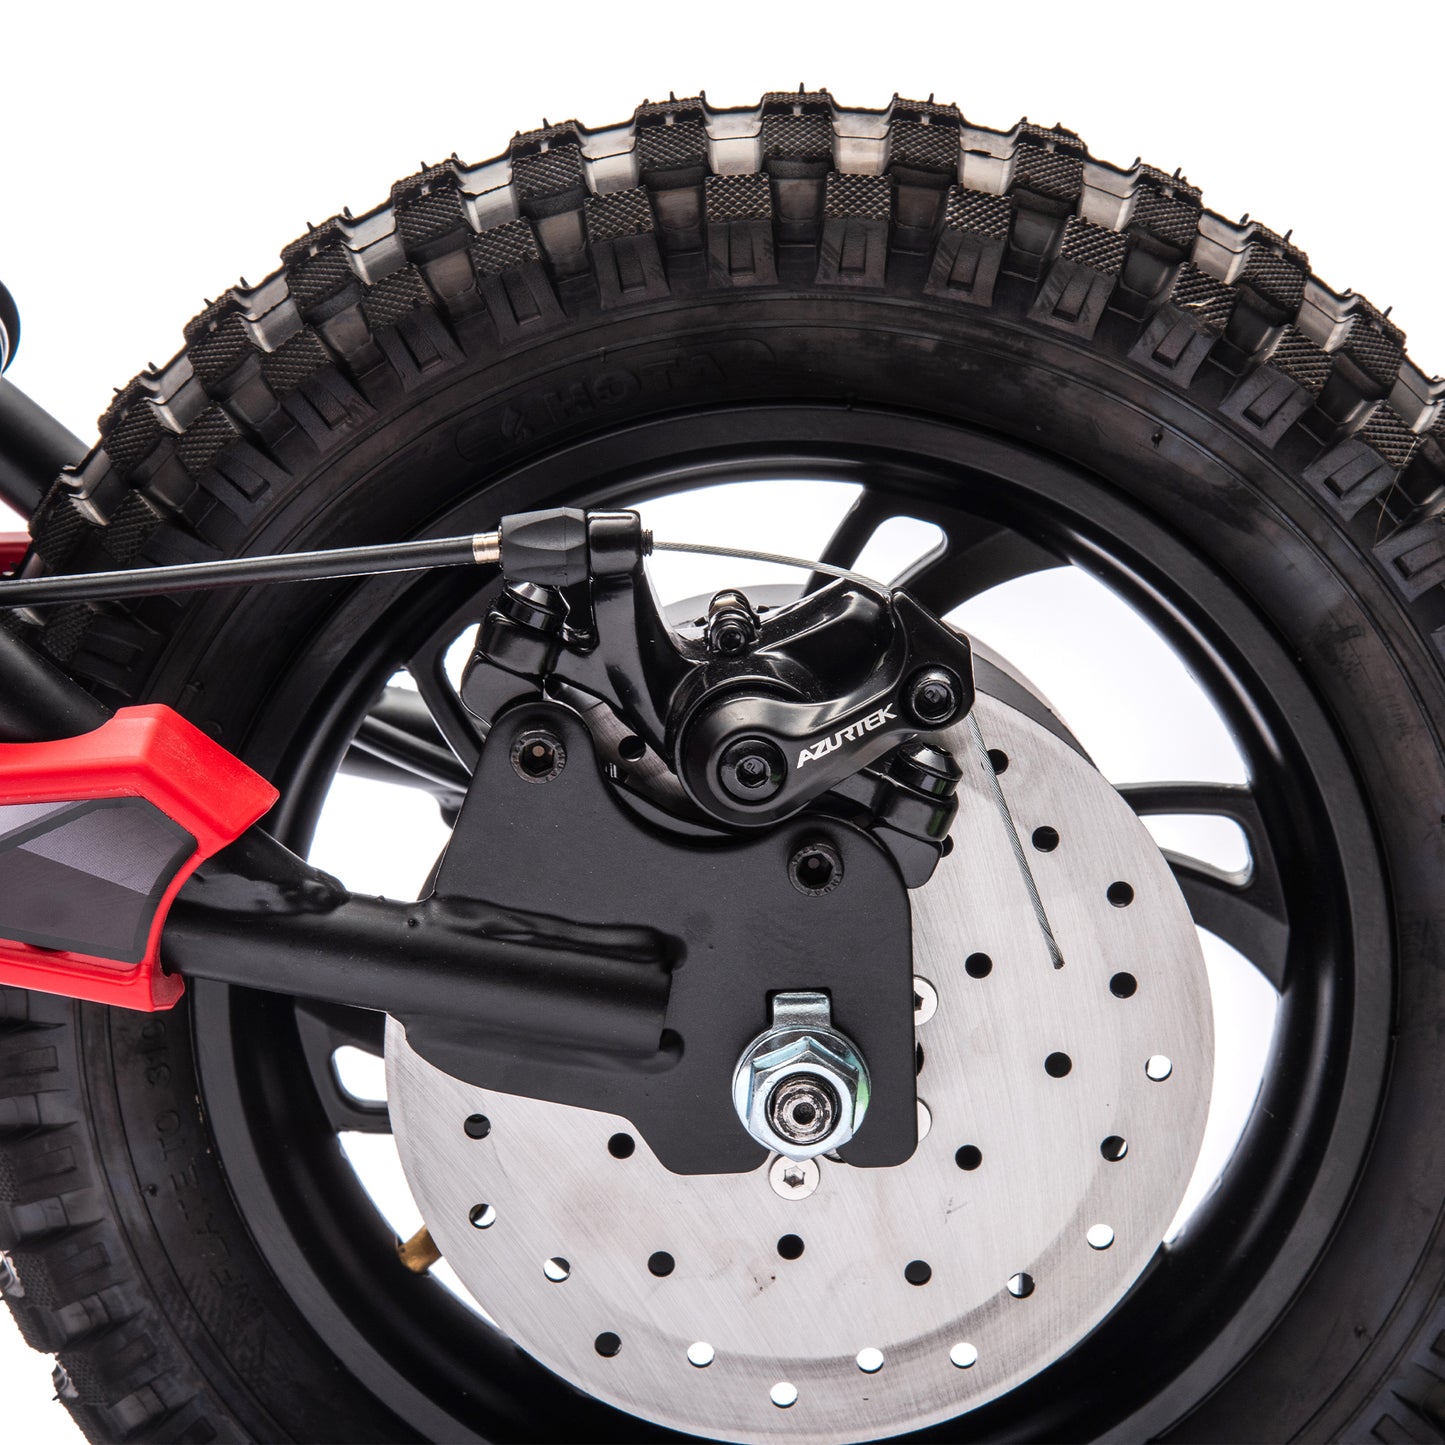 36V Electric mini dirt motorcycle for kids,350w xxxl motorcycle,Stepless variable speed drive,Disc brake,No chain,Steady acceleration,horn, power display,rate display,176 pounds for 50m or more,age14+